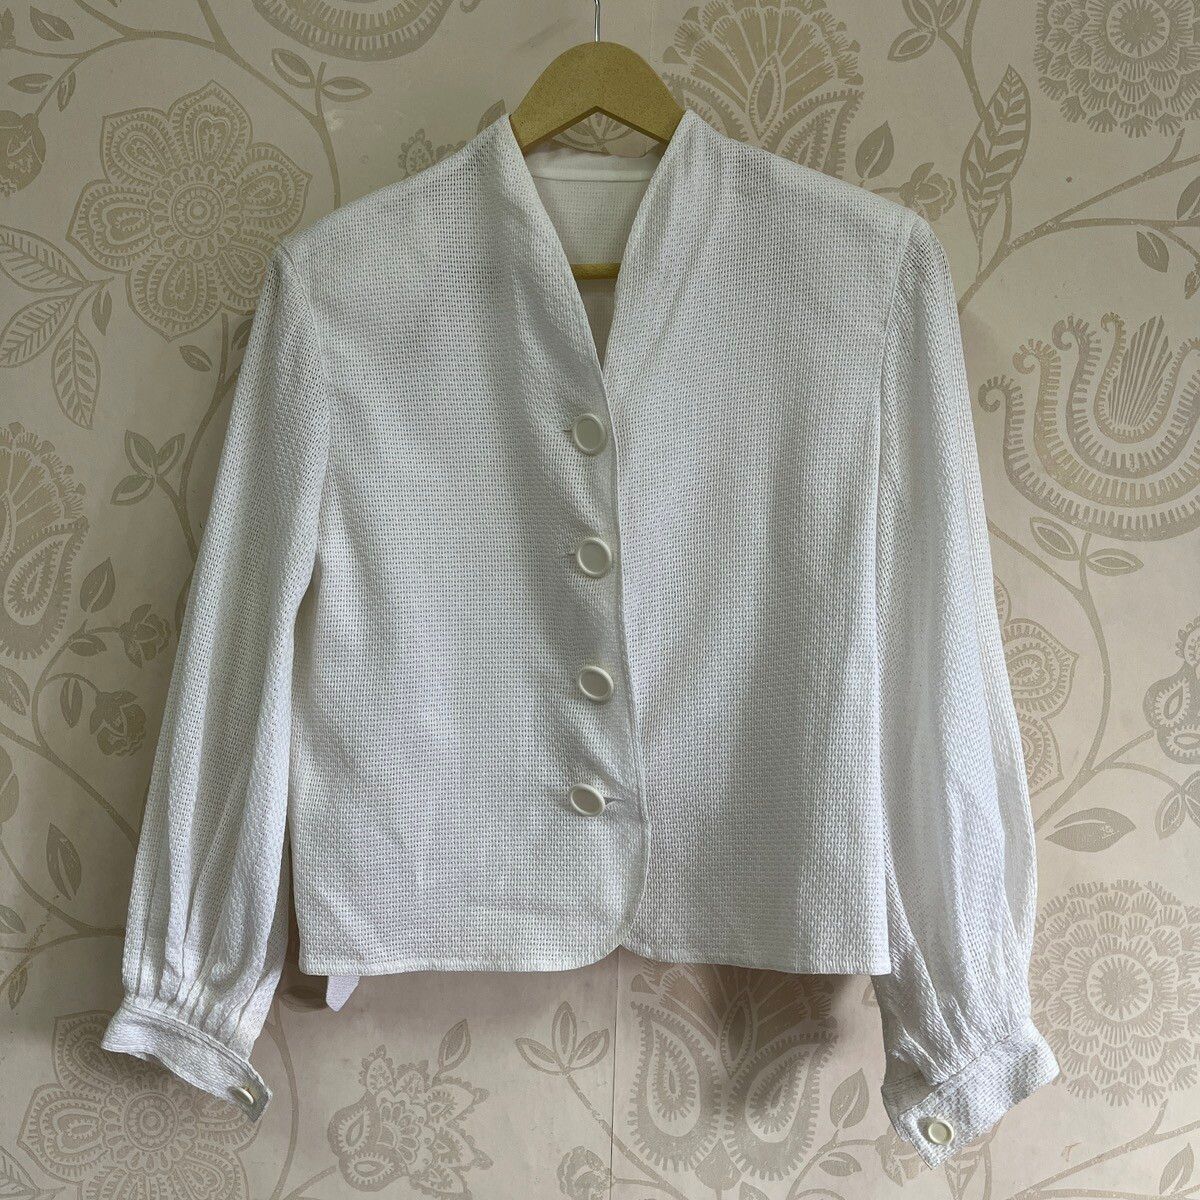 Gently Used Vintage Christian Dior Blouse Size M - 1